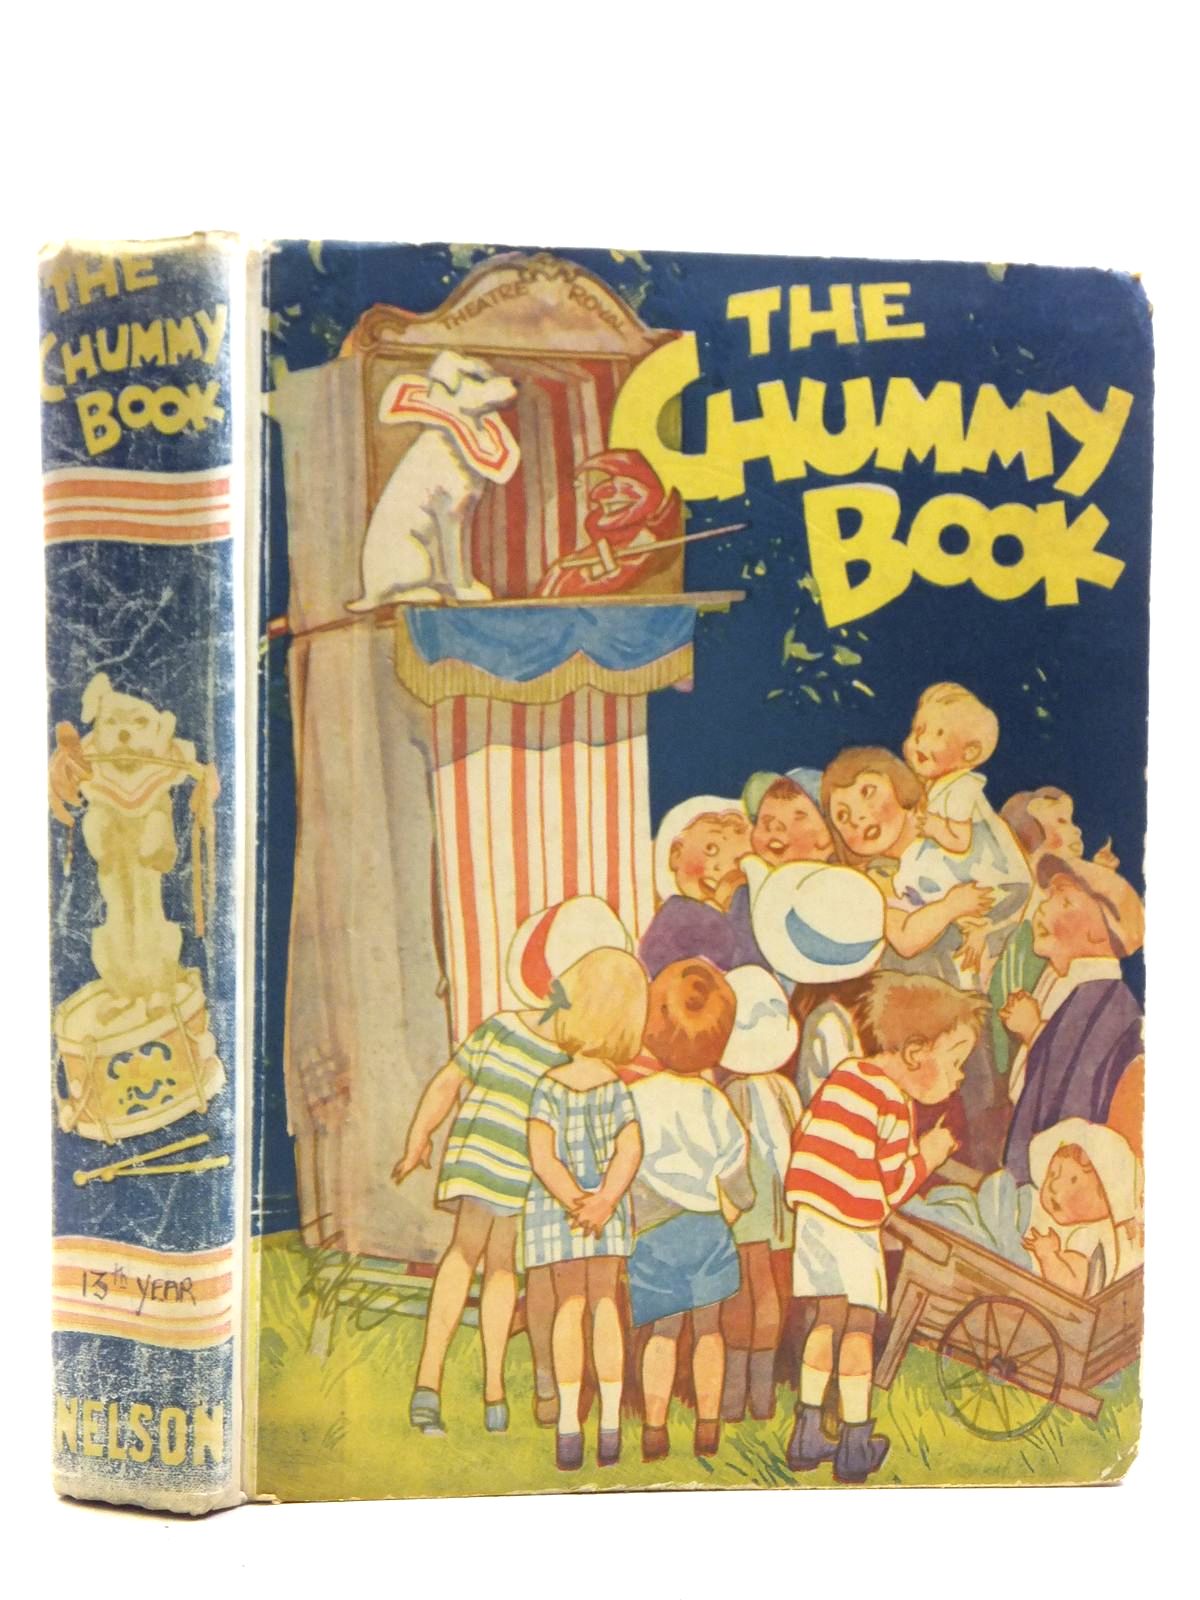 Photo of THE CHUMMY BOOK - THIRTEENTH YEAR written by Chisholm, Edwin Russell, Dorothy Herbertson, Agnes Grozier Hart, Frank Mercer, Joyce et al, illustrated by Wood, Lawson Preston, Chloe Studdy, G.E. Woolley, Harry Hart, Frank et al., published by Thomas Nelson and Sons Ltd. (STOCK CODE: 2120403)  for sale by Stella & Rose's Books